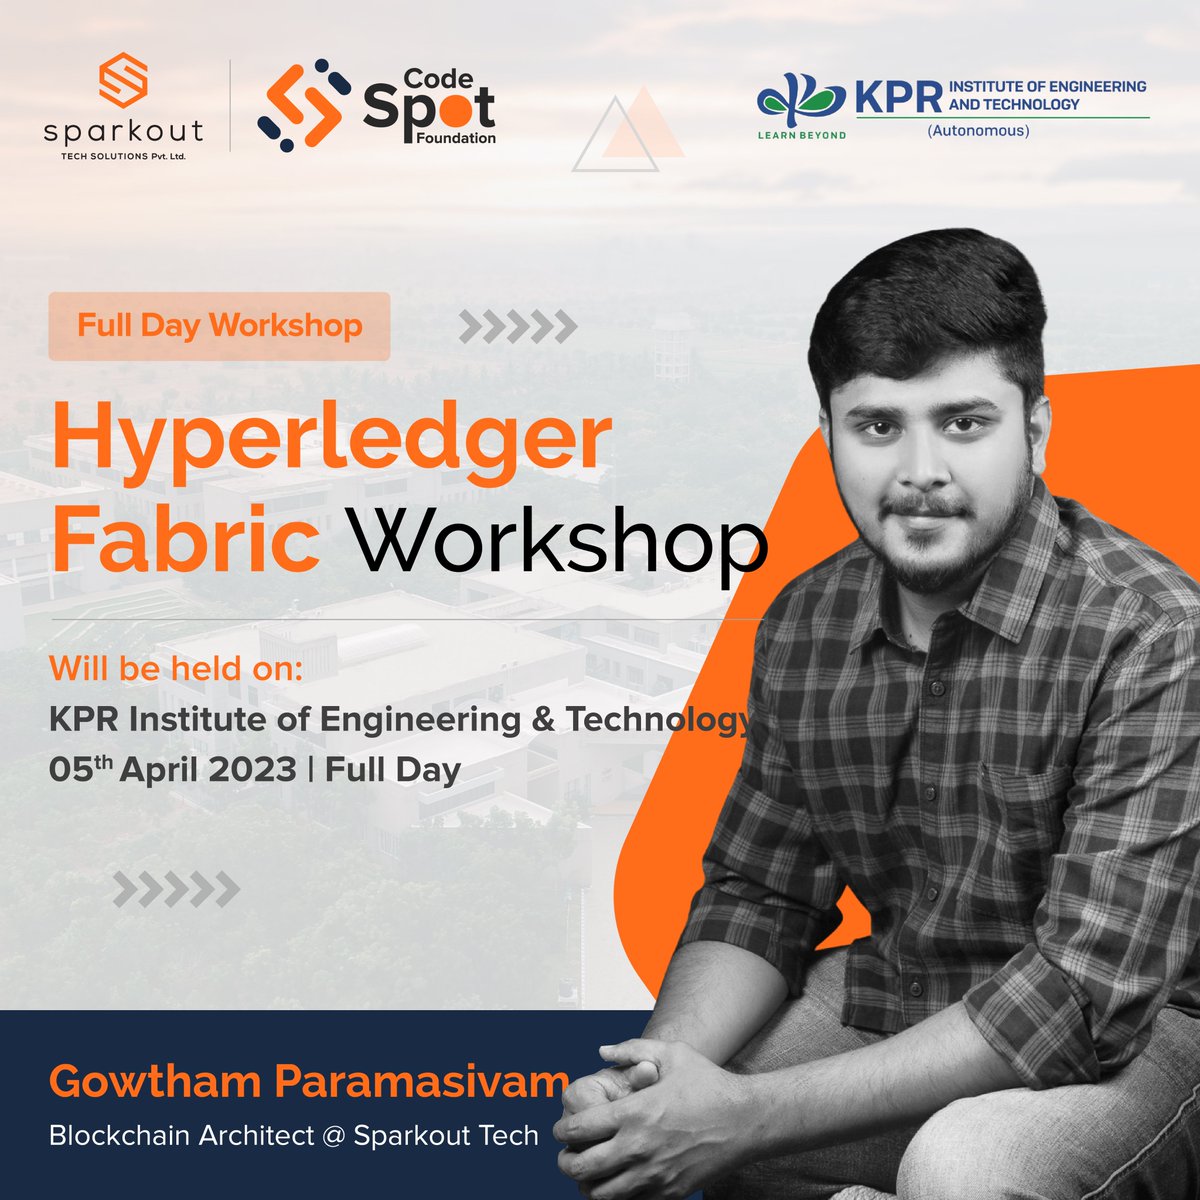 #Codespot is coming to #KPRInstitute of Engineering and Technology with our Blockchain Architect Mr. Gowtham Paramasivam for a #OneDayWorkshop on Hyperledger Fabric. . The hands-on workshop will take the students through the basics of #HyperledgerFabric and it's use cases.